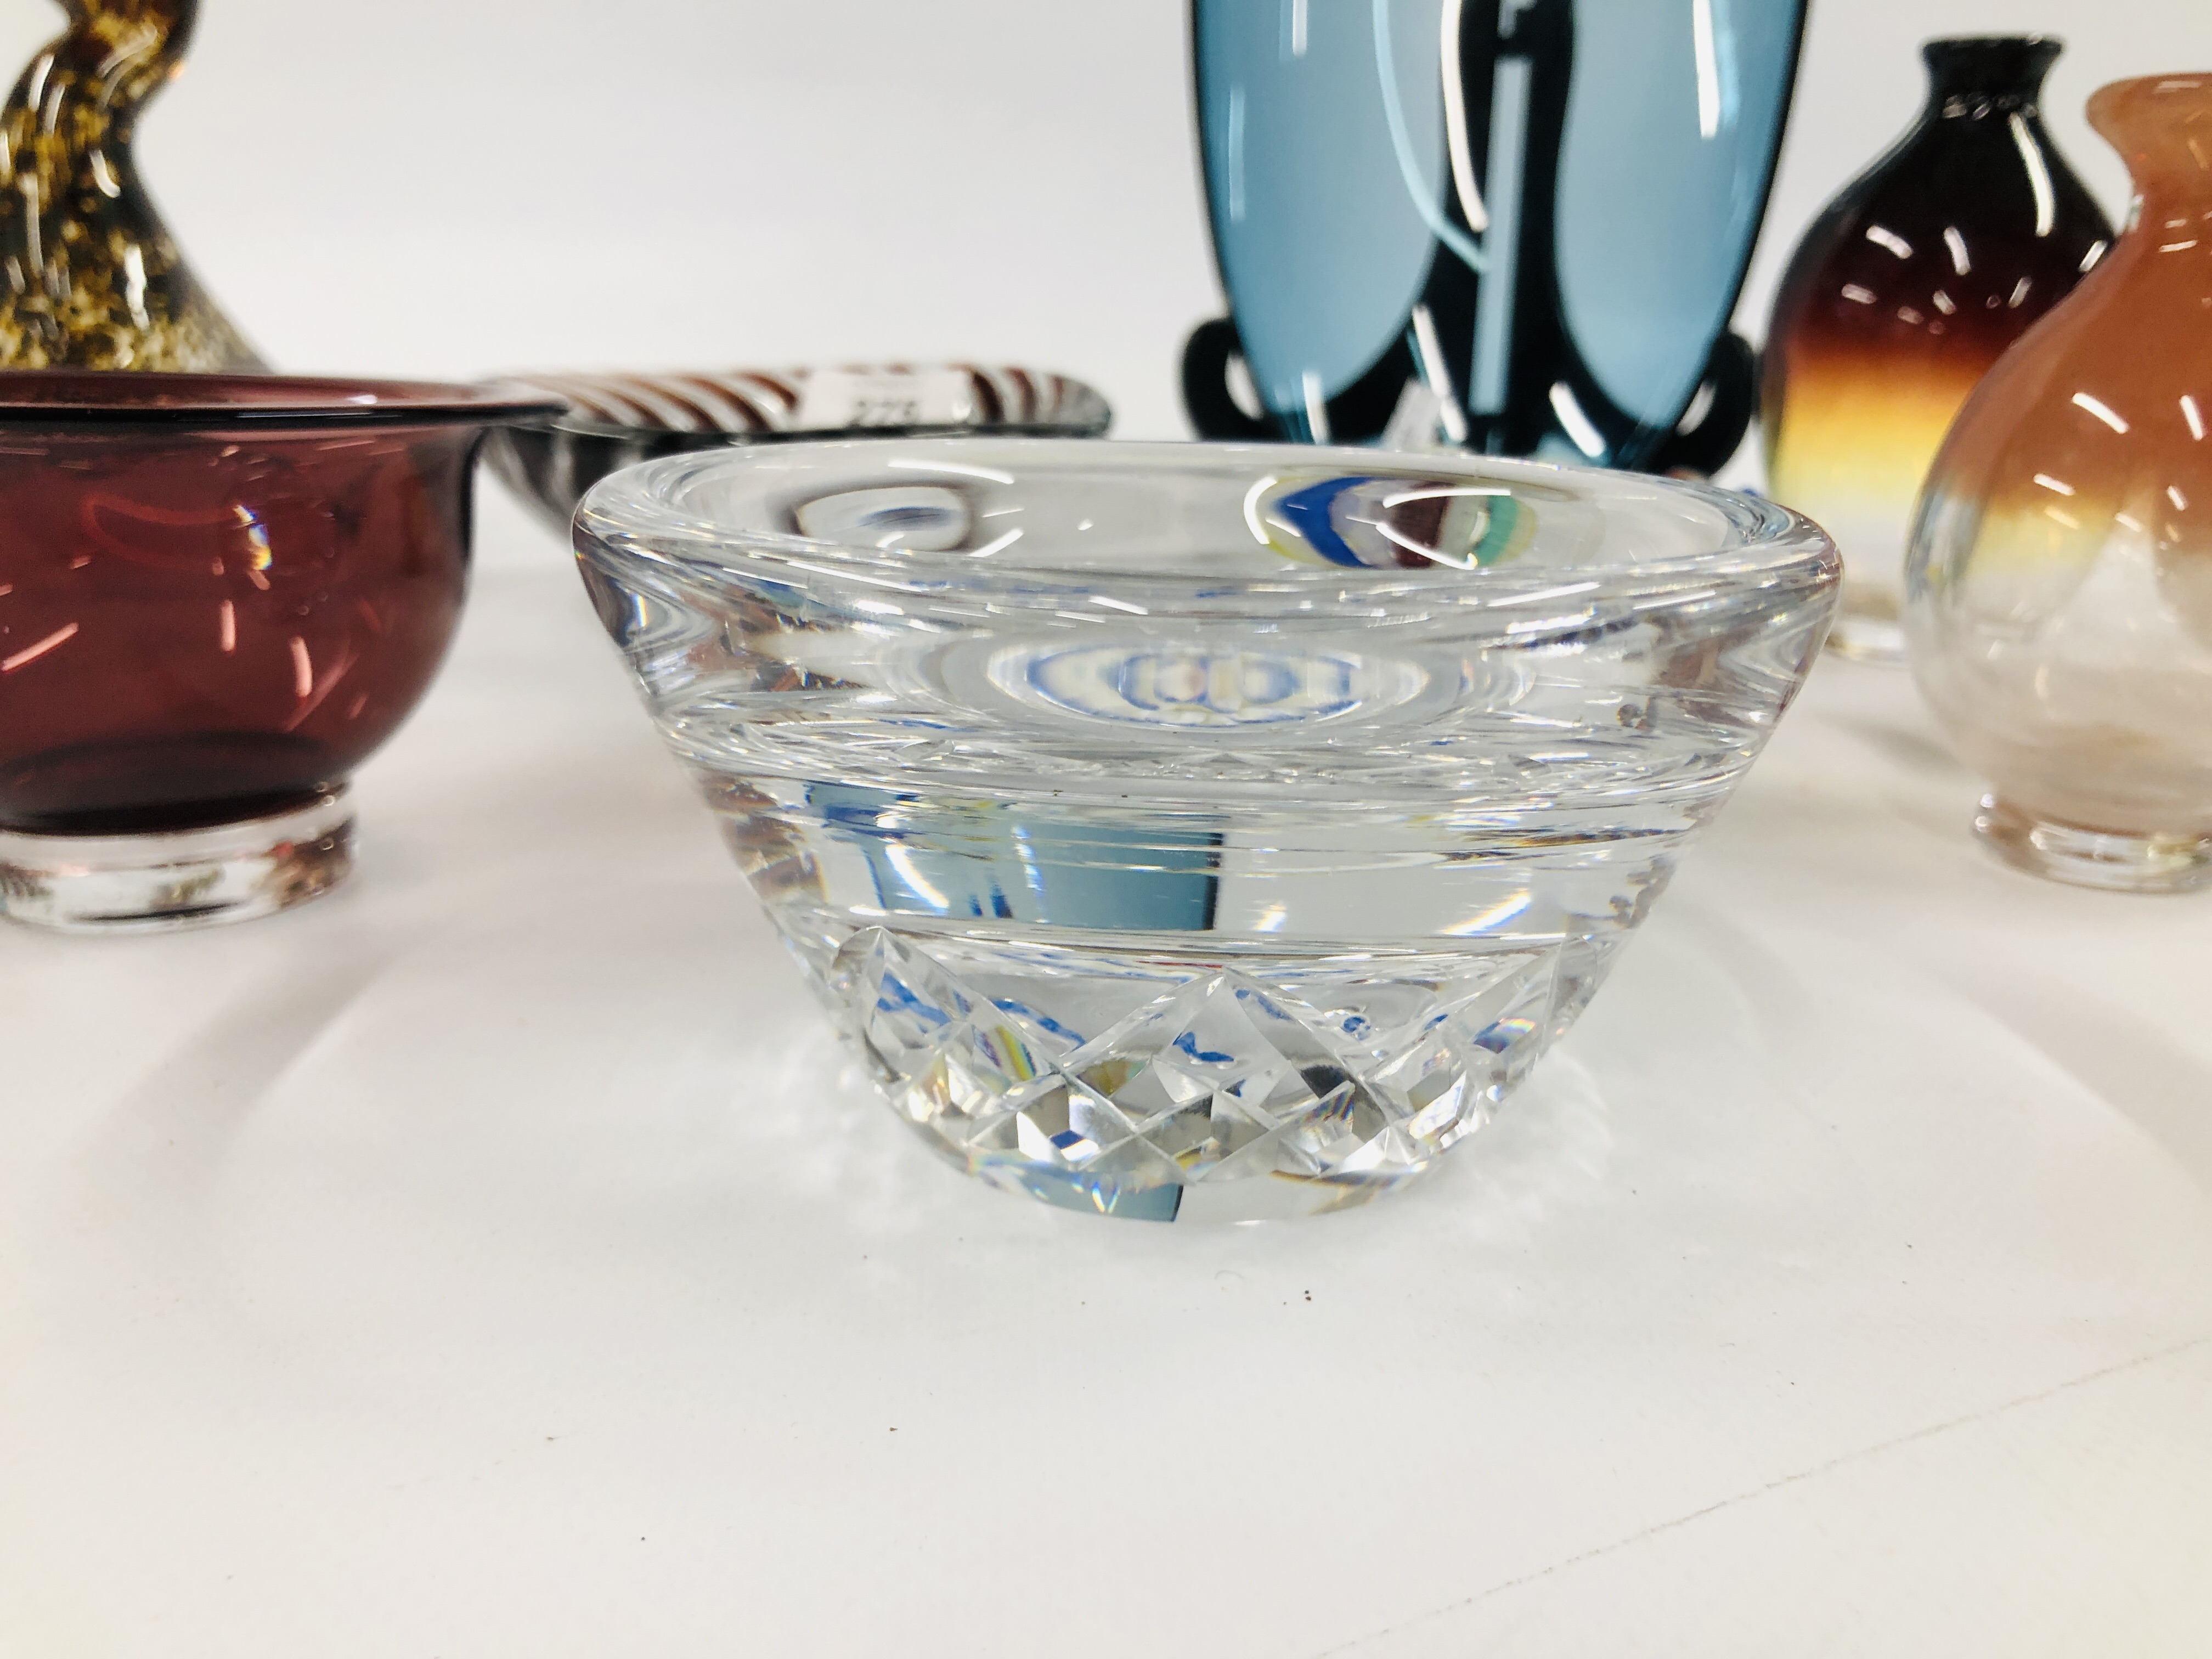 A BLUE OVAL GLASS DISH ALONG WITH THREE SMALL GLASS BOWLS, ONE WITH RED SPIRAL DECORATION, - Image 5 of 14